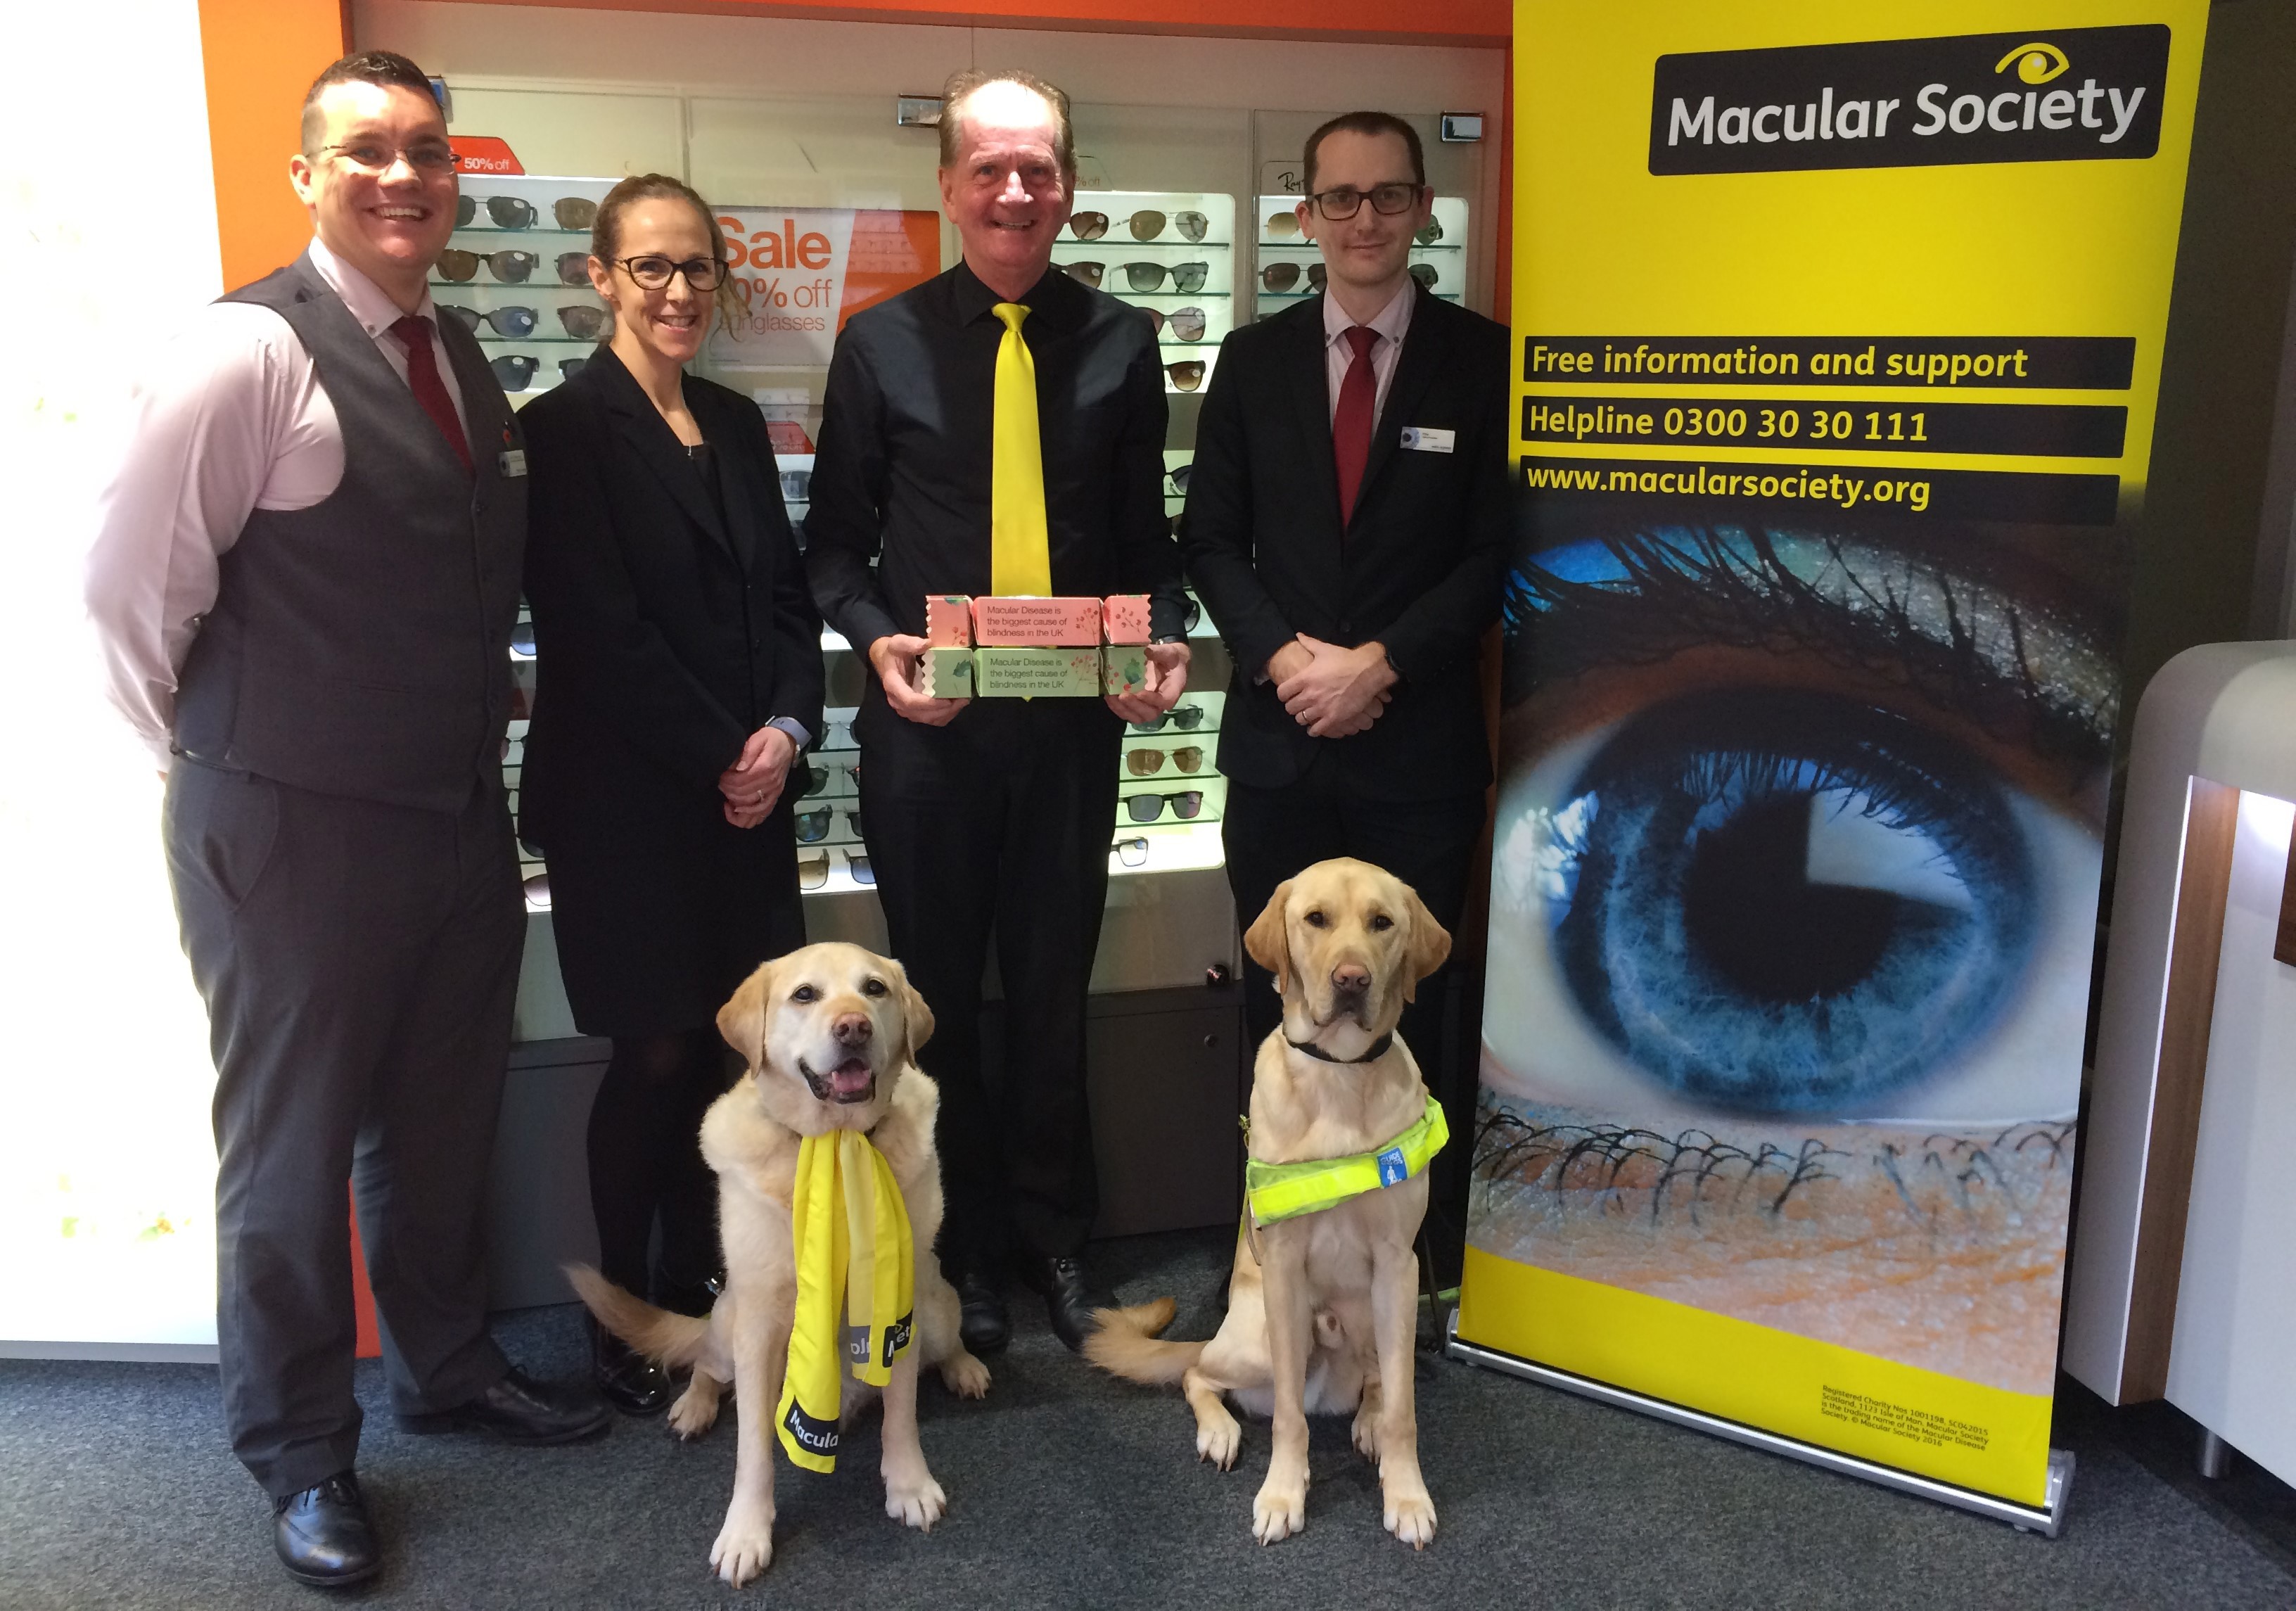 Why choose the Macular Society primary image